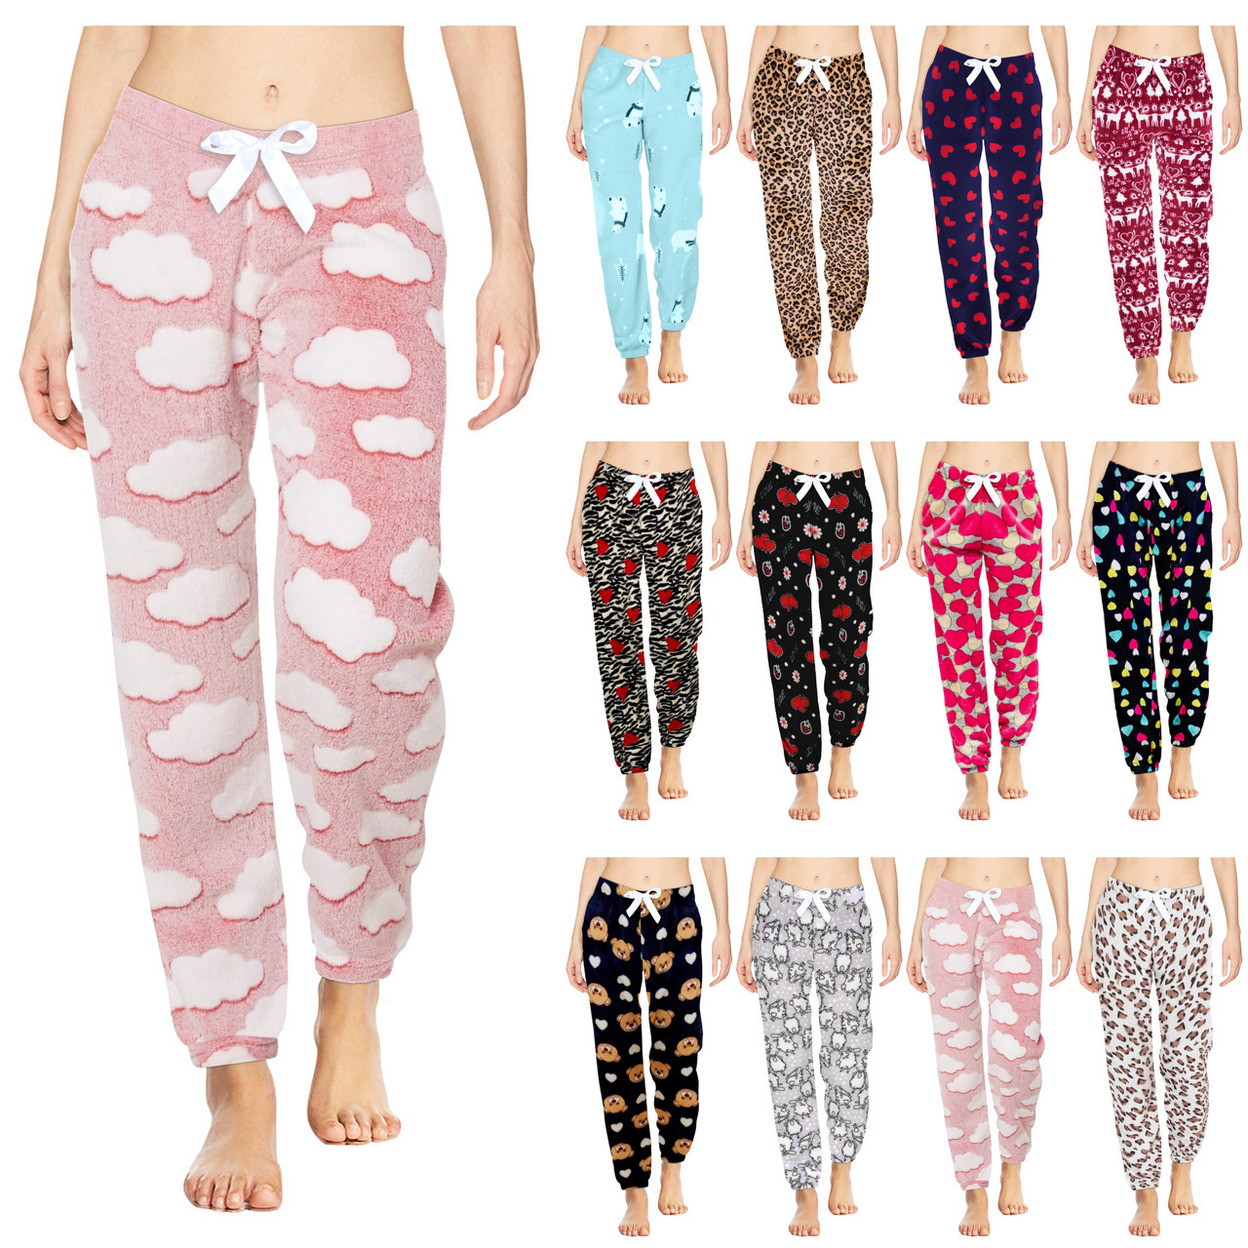 Multi-Pack: Women's Printed Ultra-Soft Comfy Stretch Micro-Fleece Pajama Lounge Pants - 3-pack, Shapes, X-large